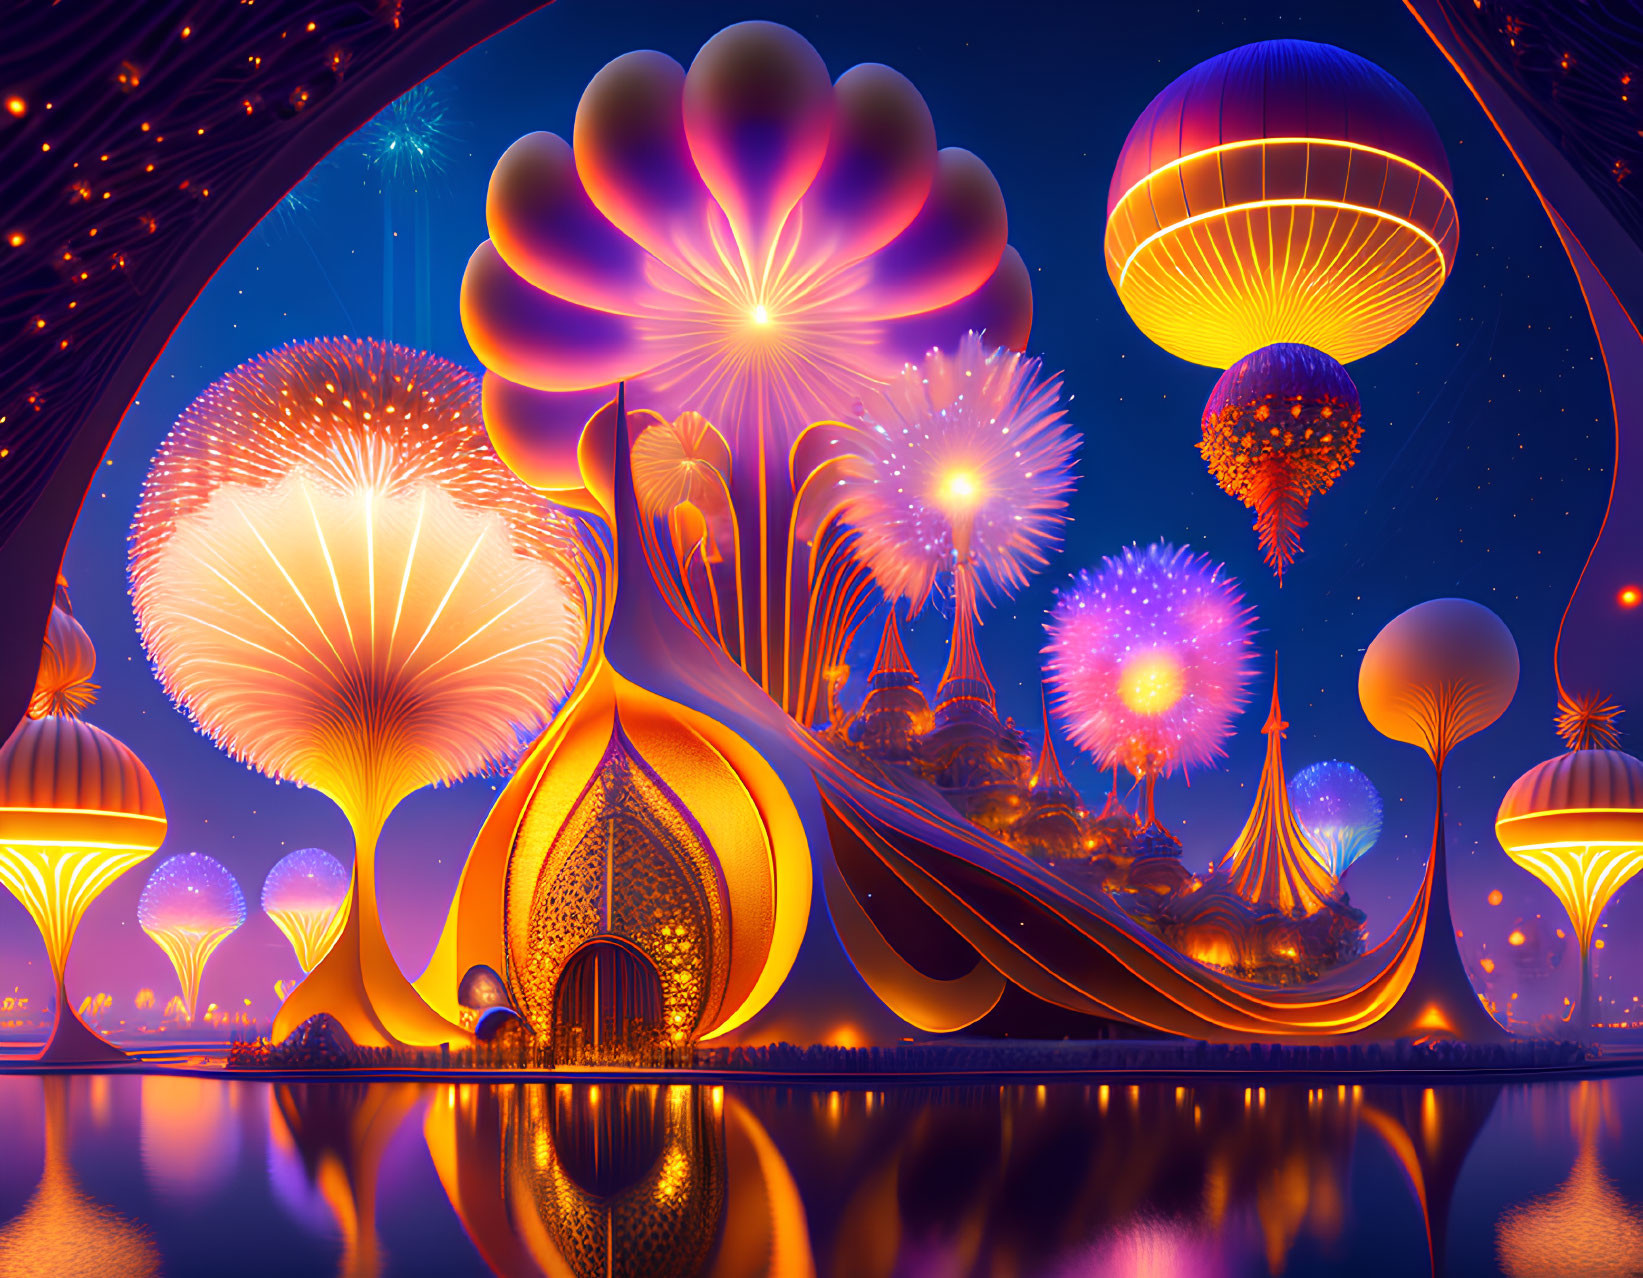 Fantastical landscape with glowing mushrooms and fireworks under starry sky